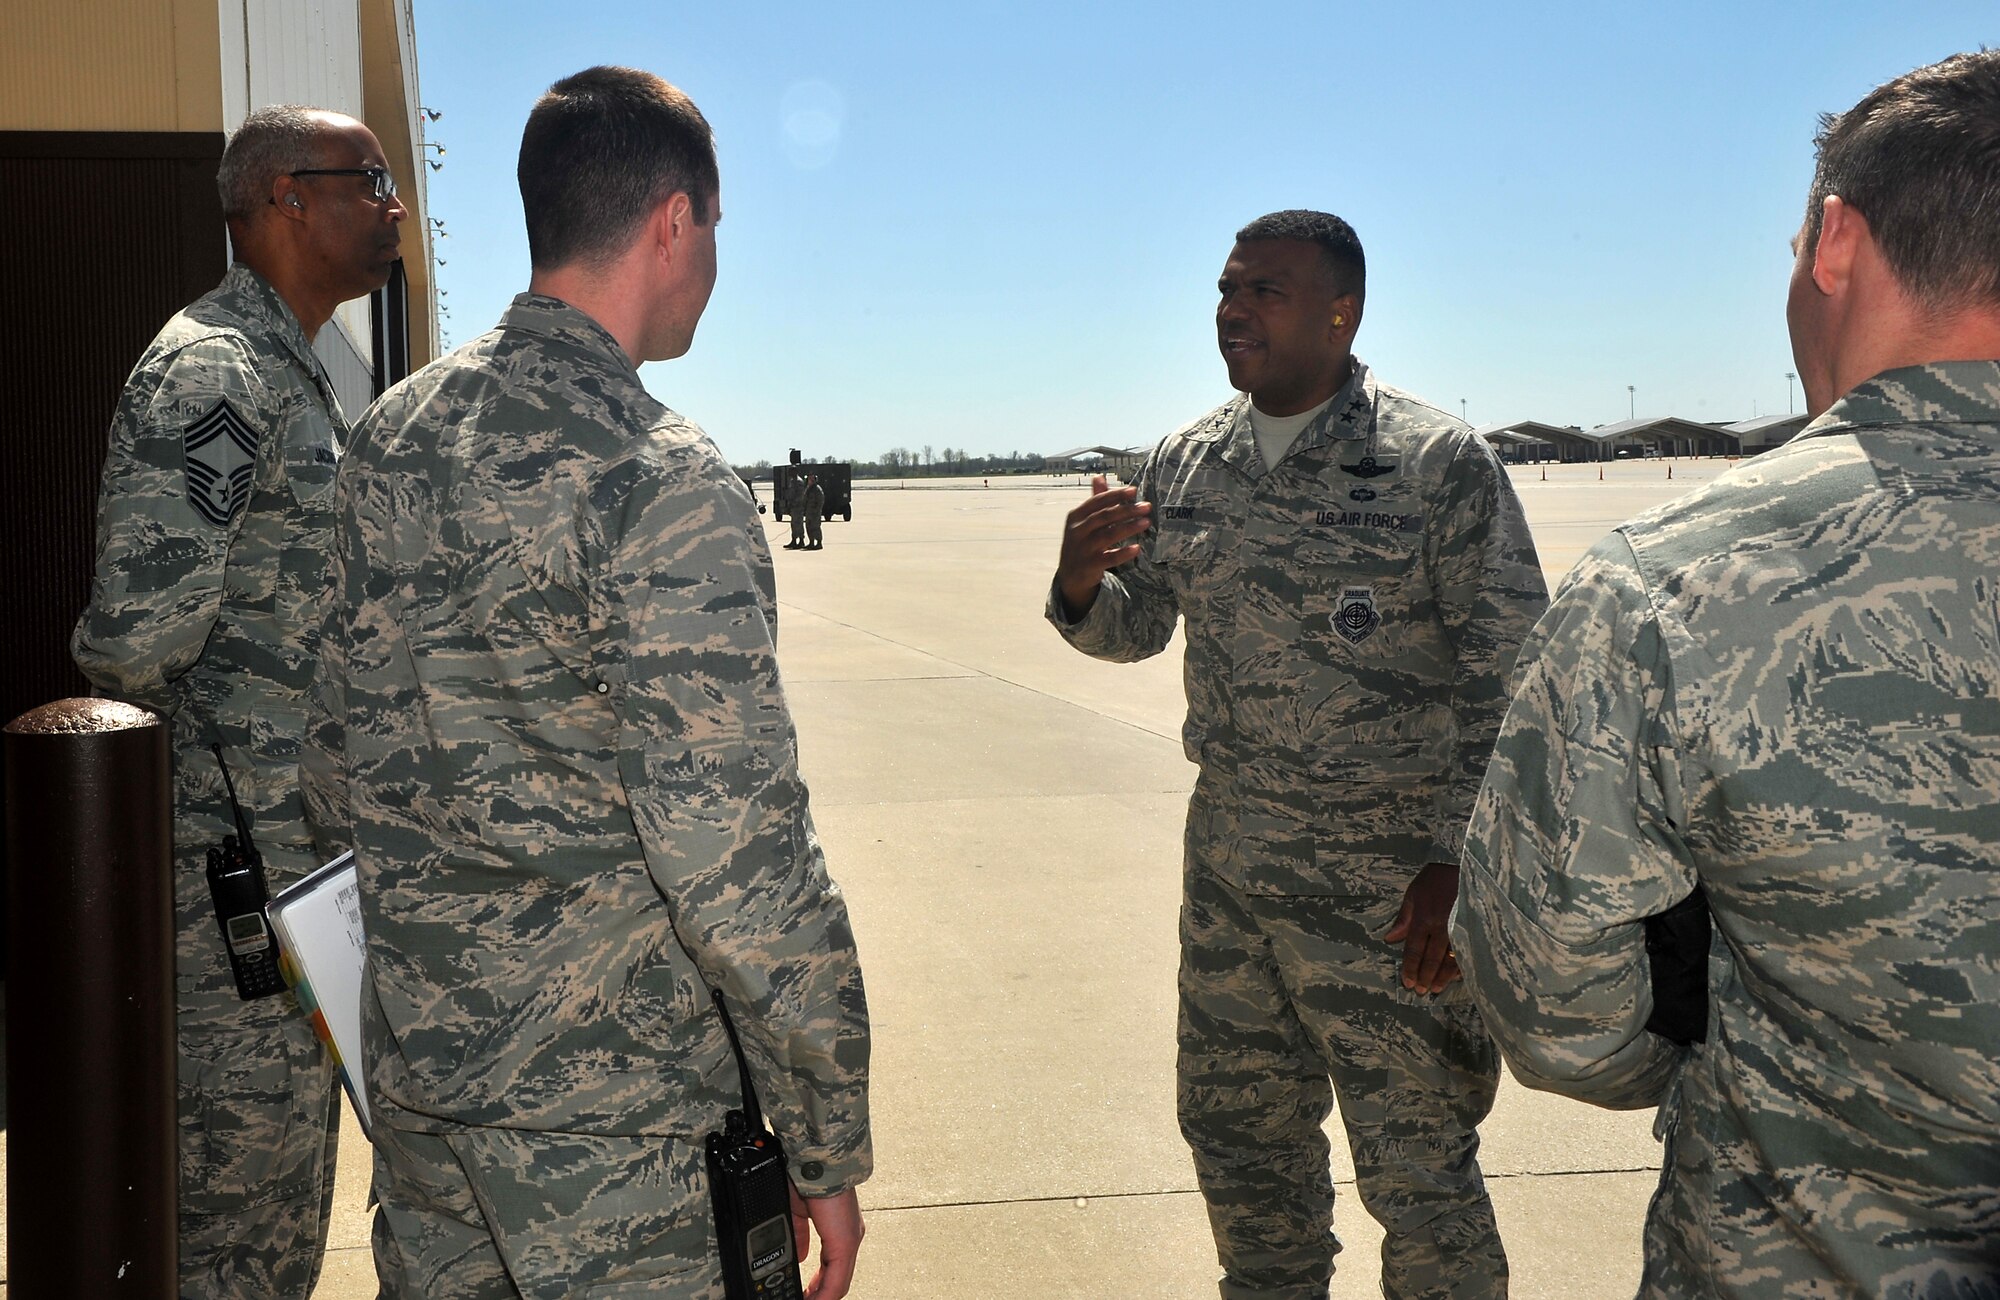 Maj. Gen. Richard M. Clark, 8th Air Force commander, center, speaks with members of the 509th Bomb Wing outside an aircraft hangar at Whiteman Air Force Base, Mo., April 12, 2016. Clark visited Whiteman to observe operations during the CONSTANT VIGILANCE 16 exercise. (U.S. Air Force photo by Airman 1st Class Michaela Slanchik)